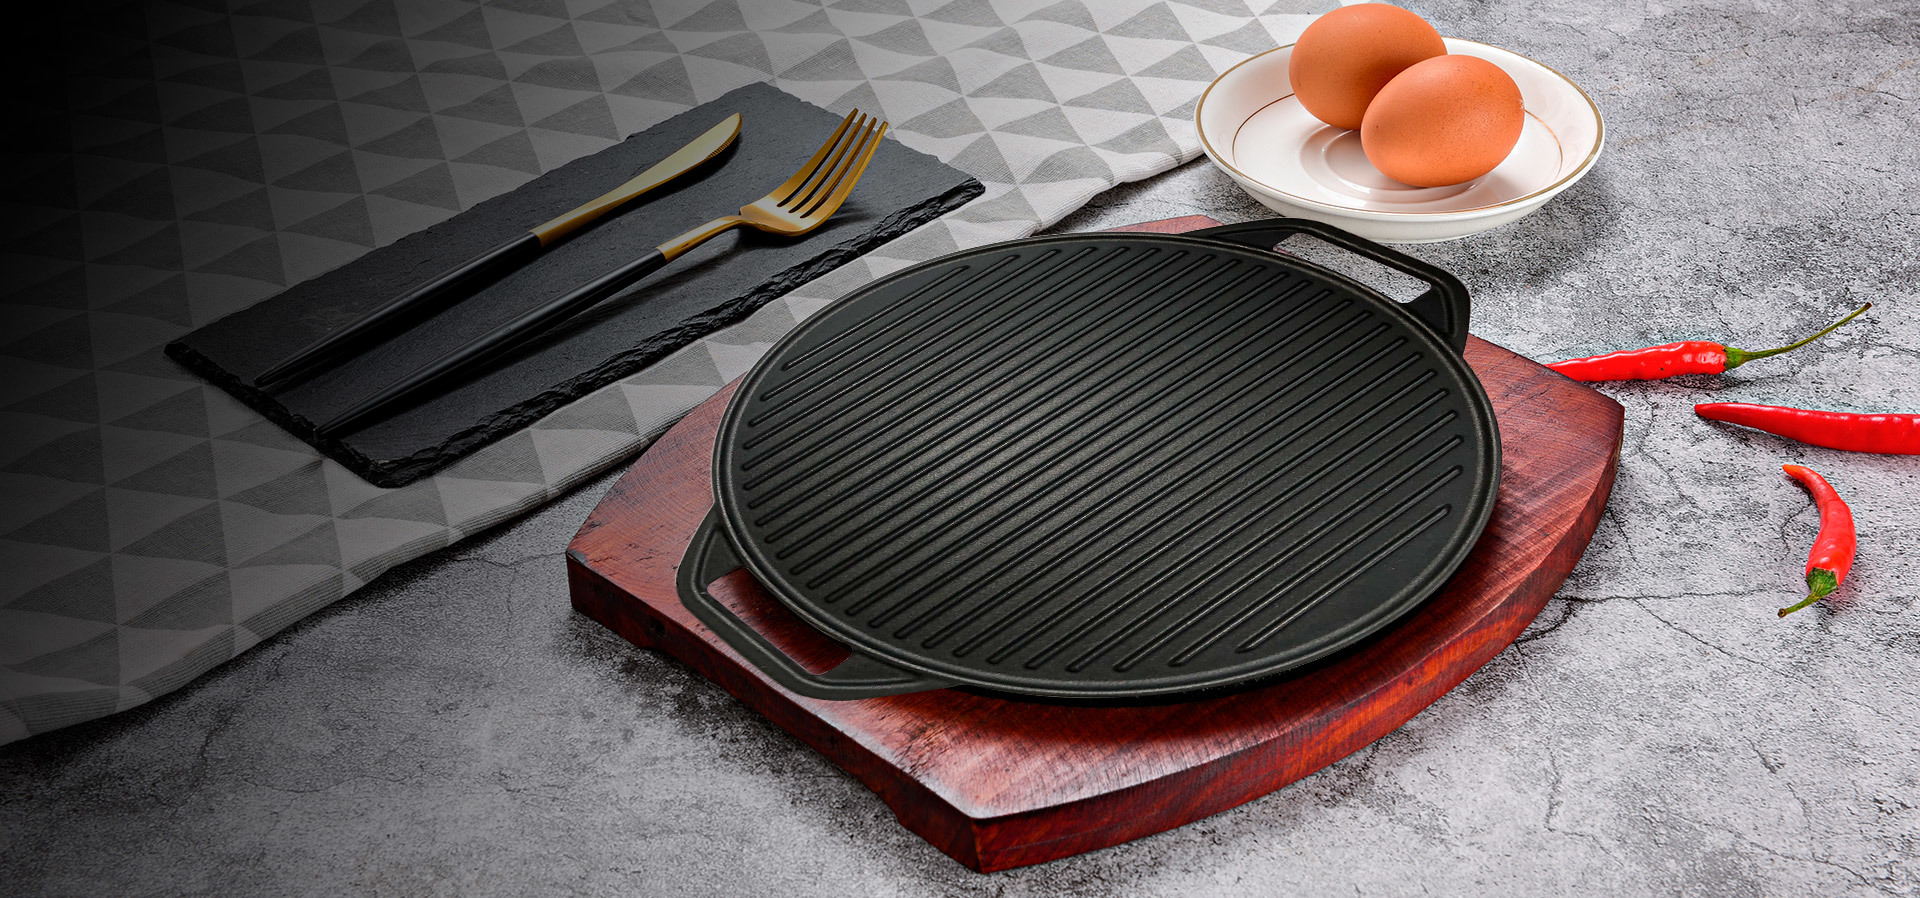 CAST IRON PRODUCTS